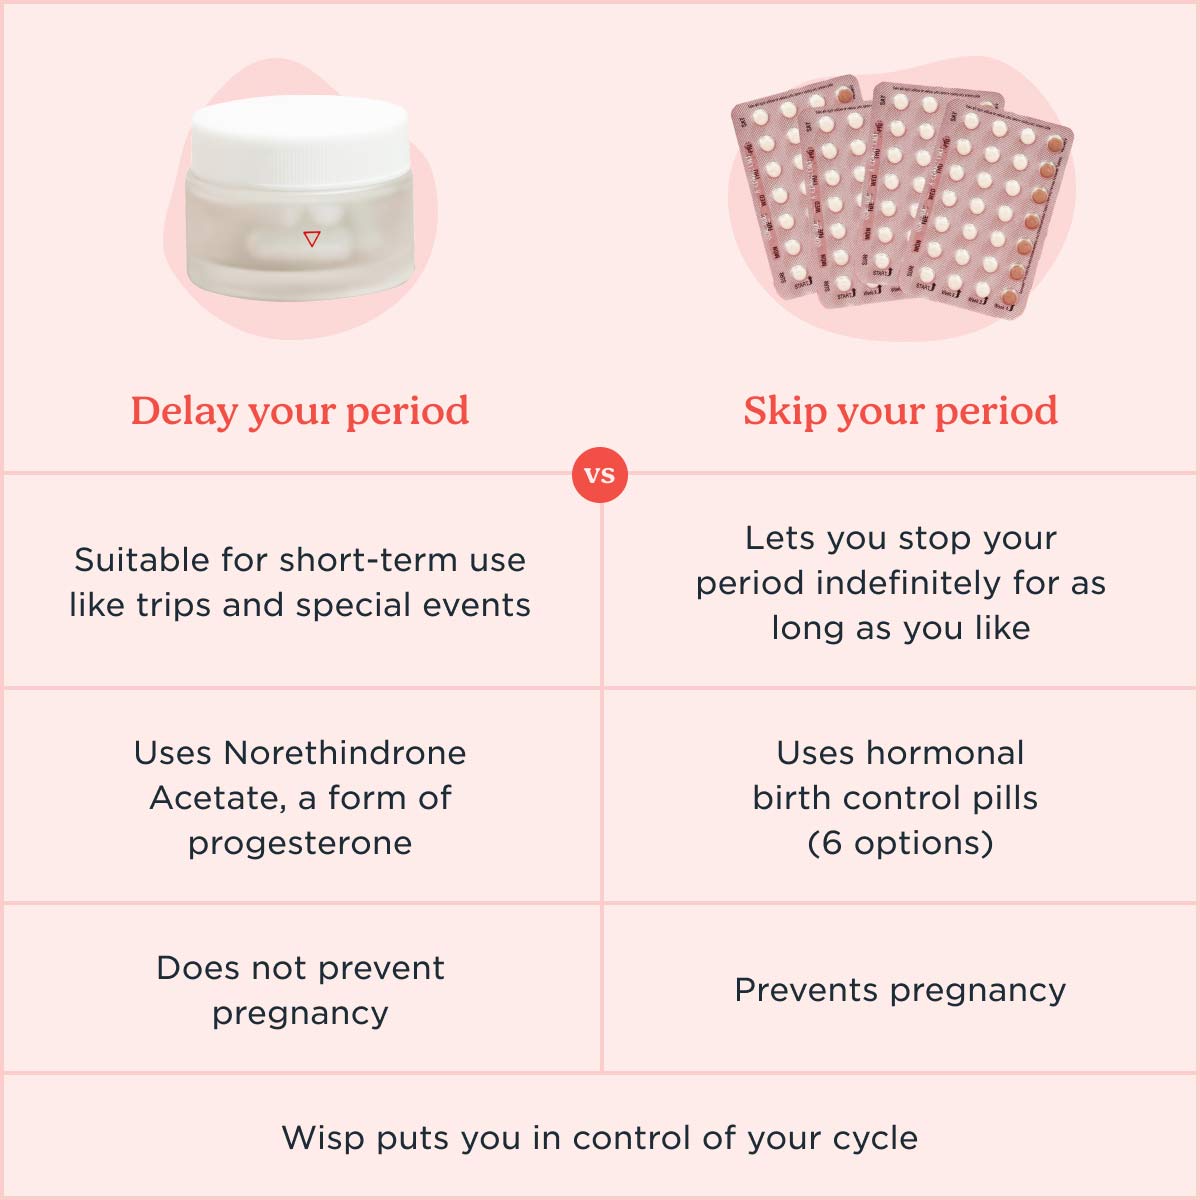 Learn How To Skip Your Period with Medication